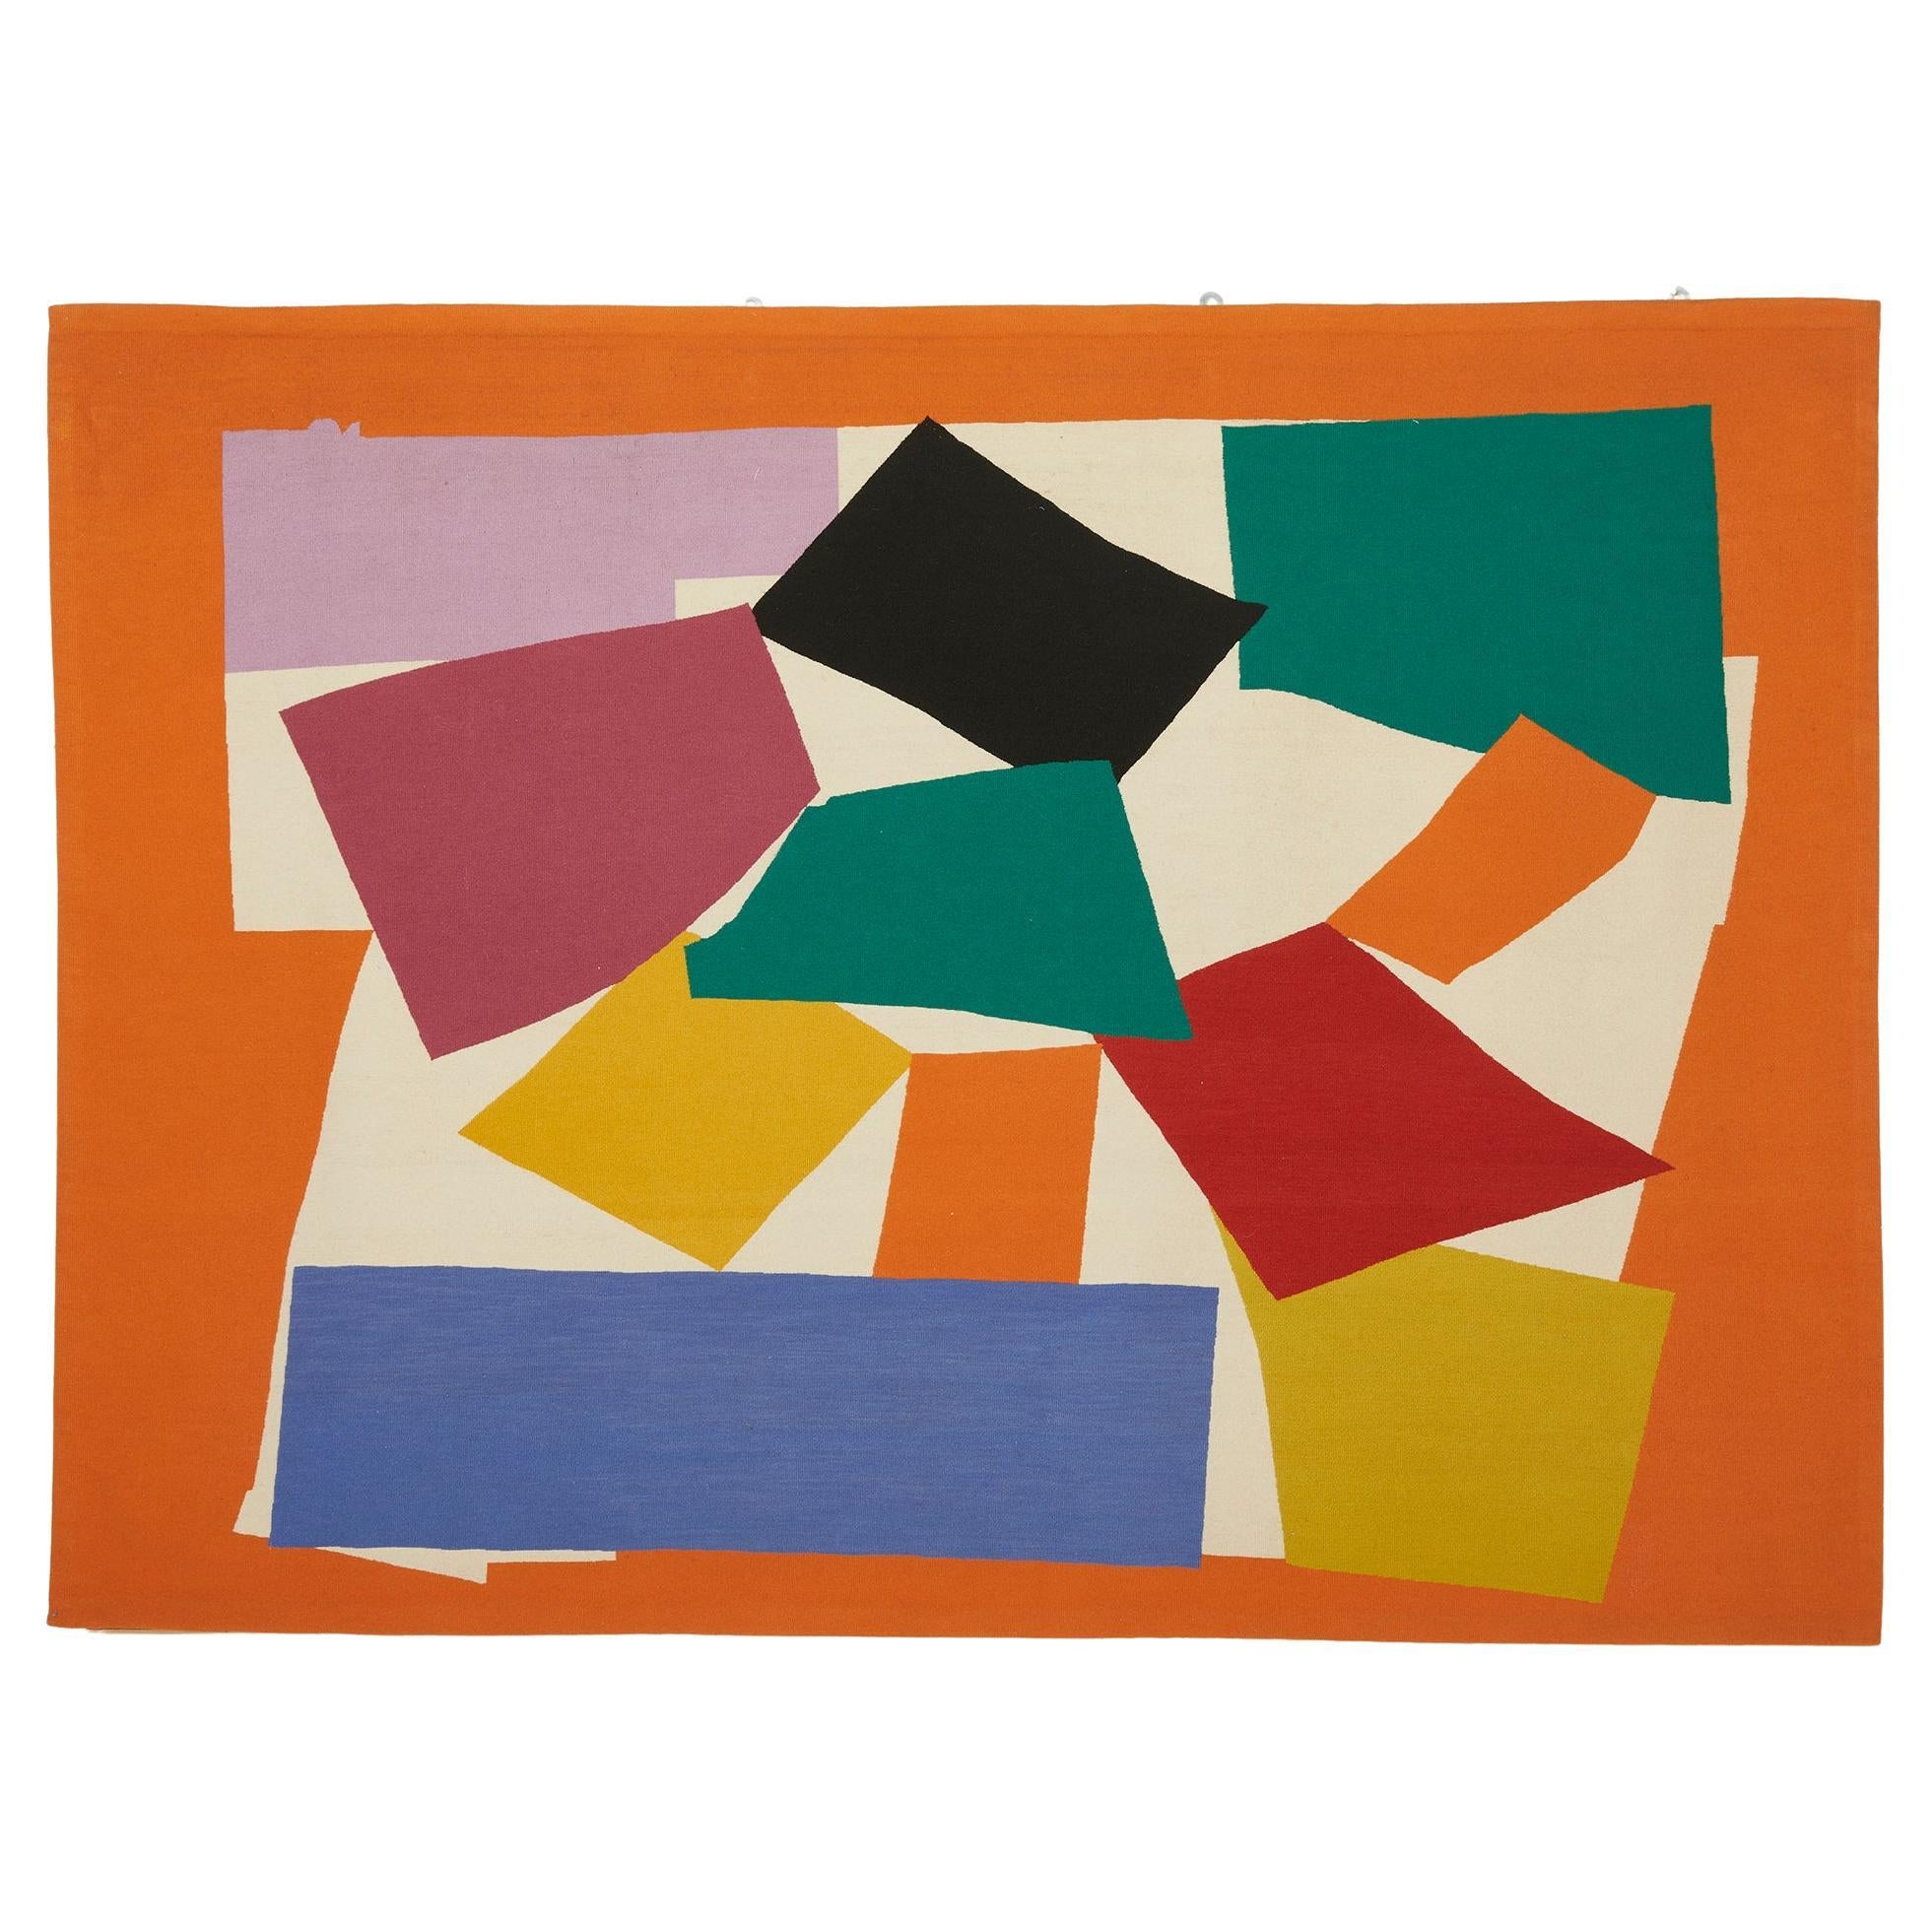 Wall Tapestry After "L'escargot" by Henri Matisse, Manufactura Portalegre, 1970 For Sale